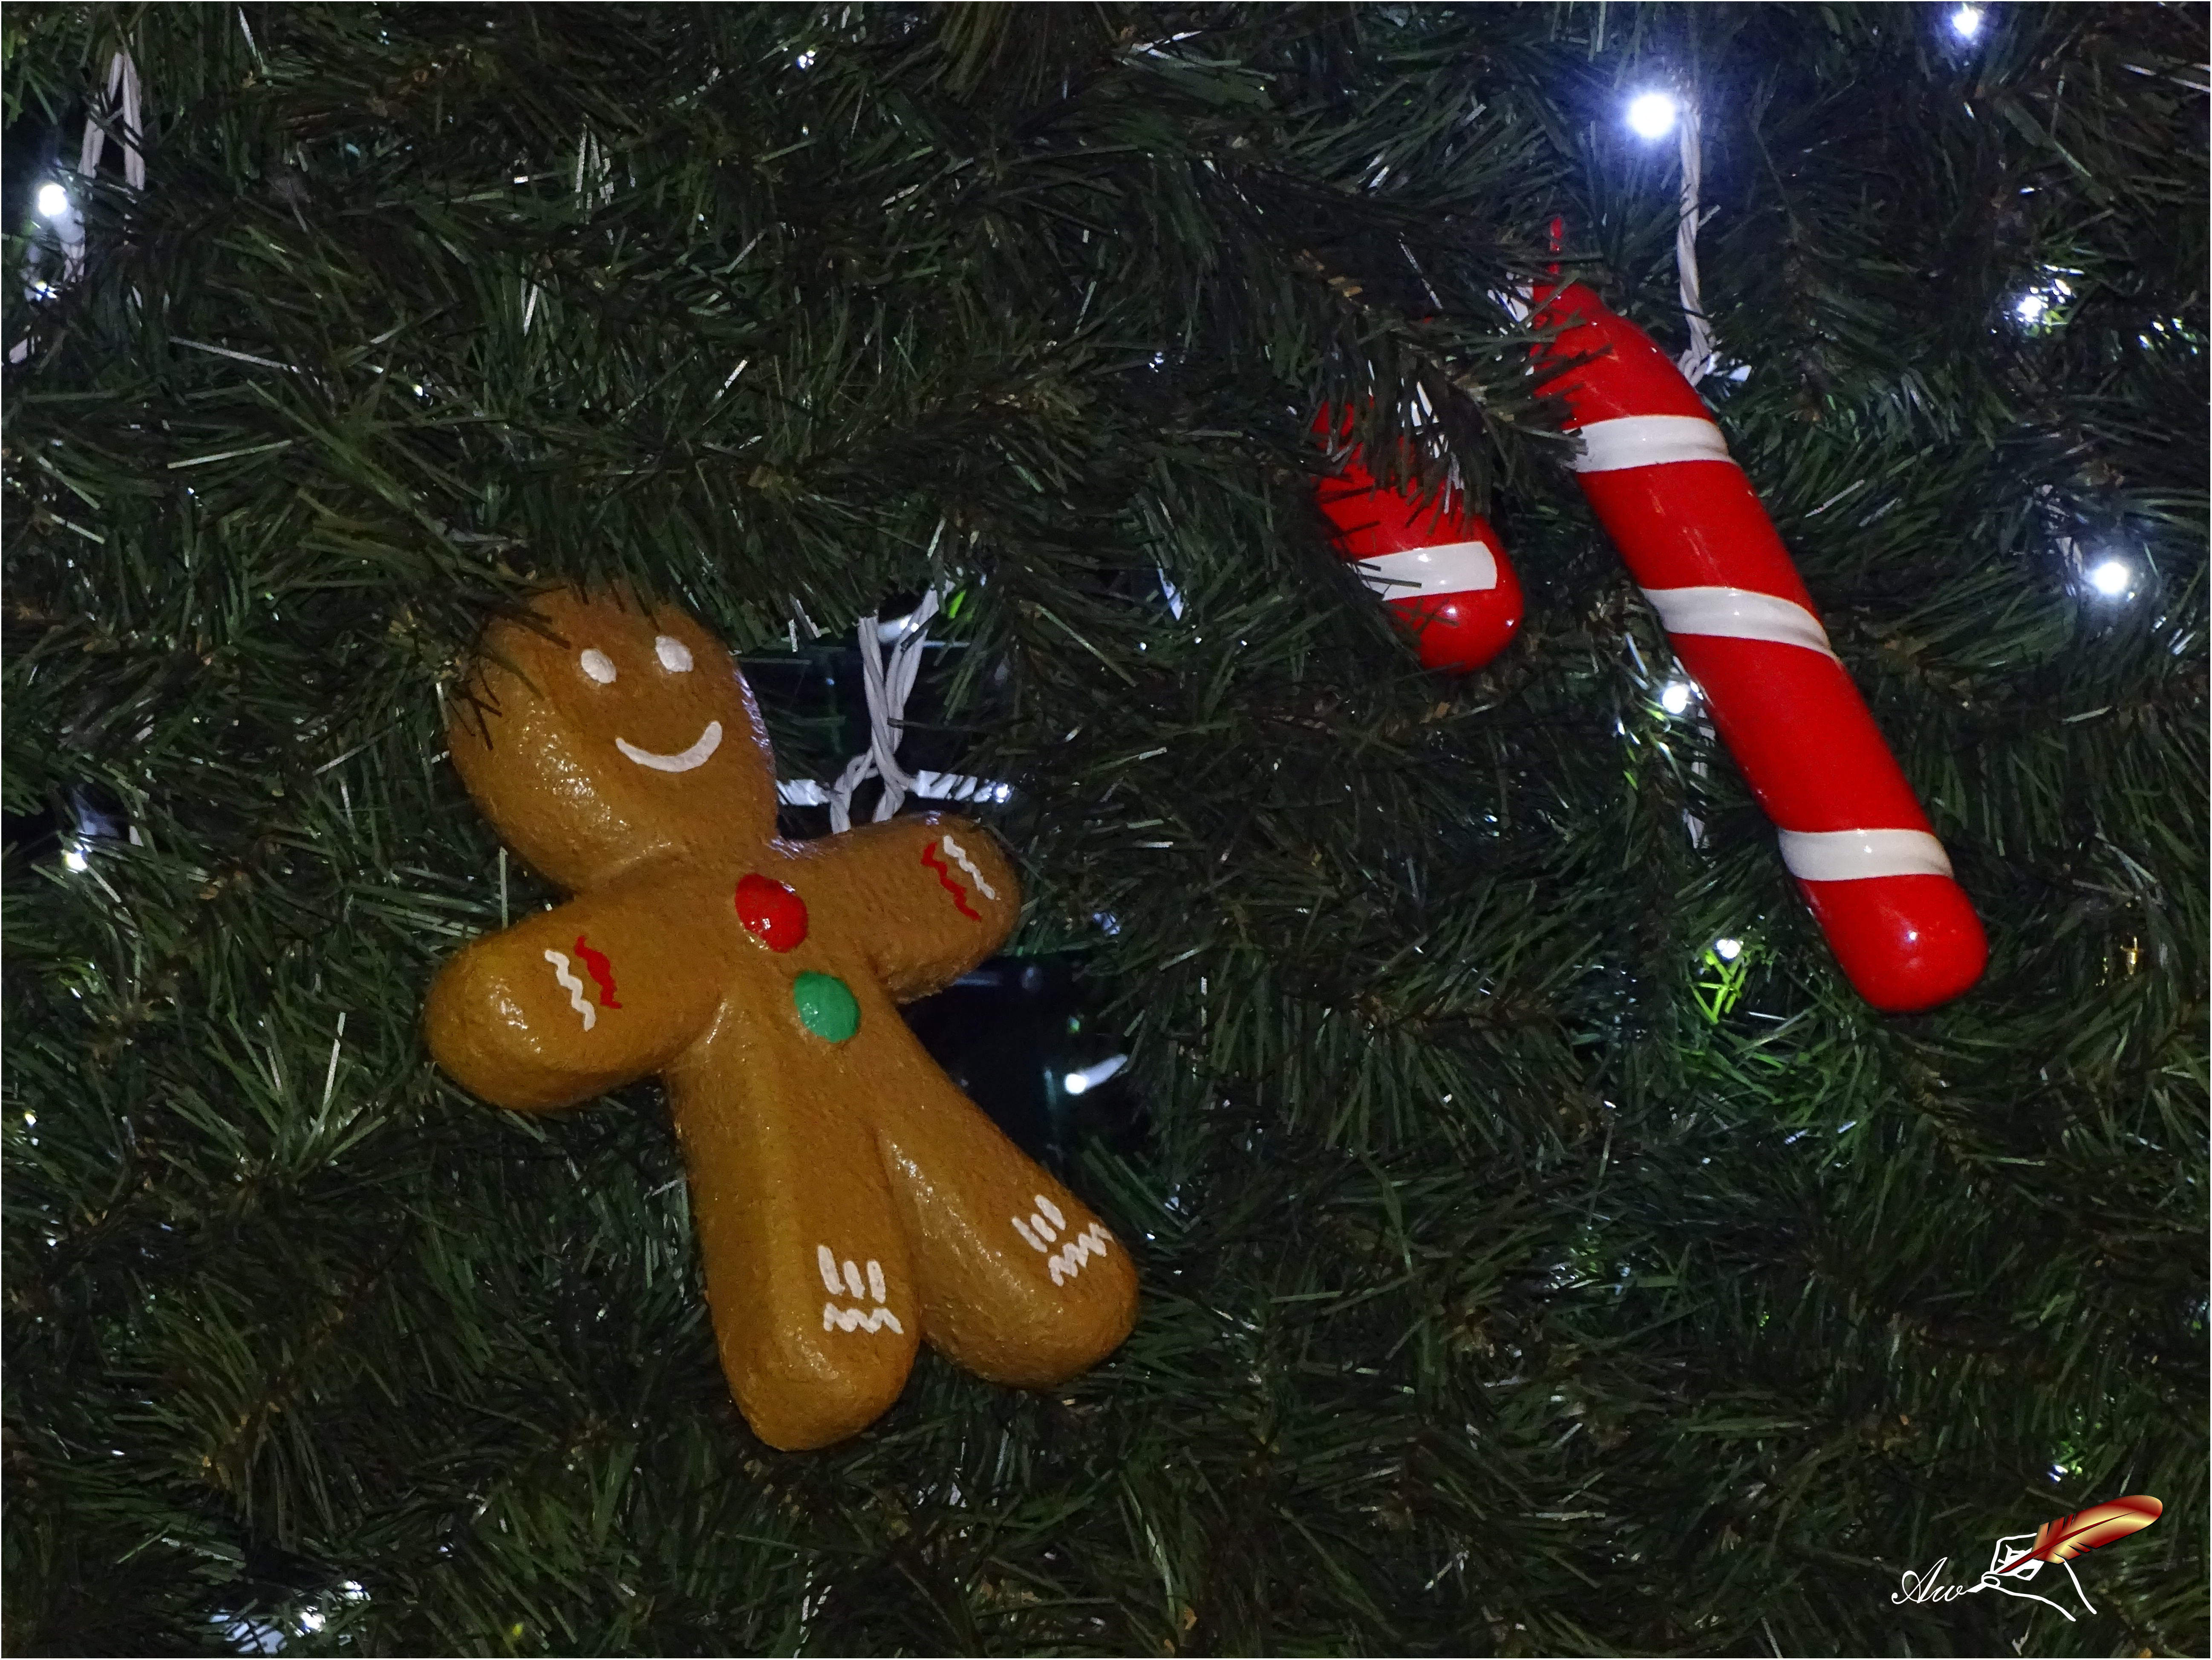 Gingerbread man and candy cane in Christmas tree - by Andrada Anitei